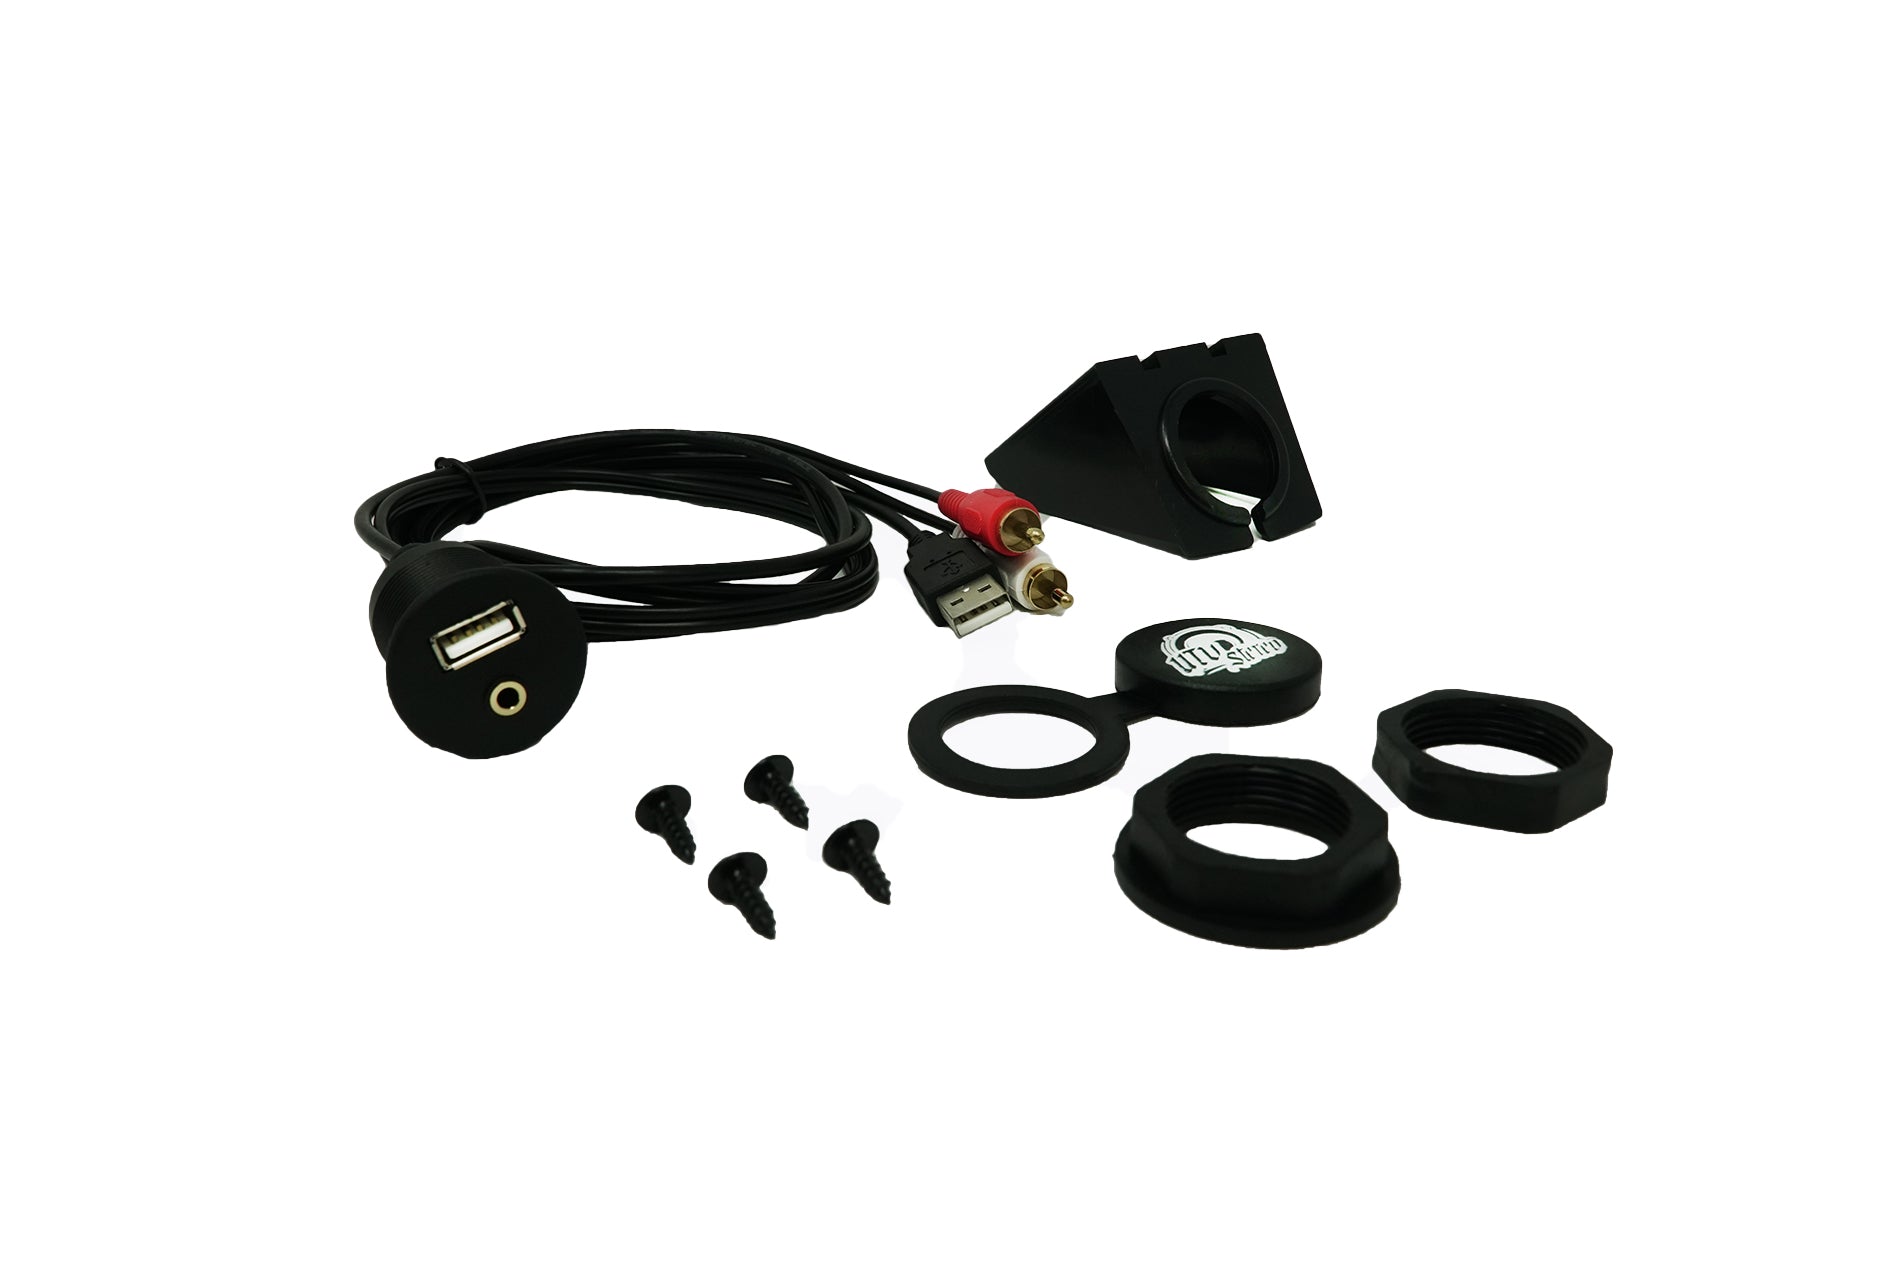 USB & Auxiliary Flush Mount Adapter for Source Units | UTVS-USB/AUX-FLMT